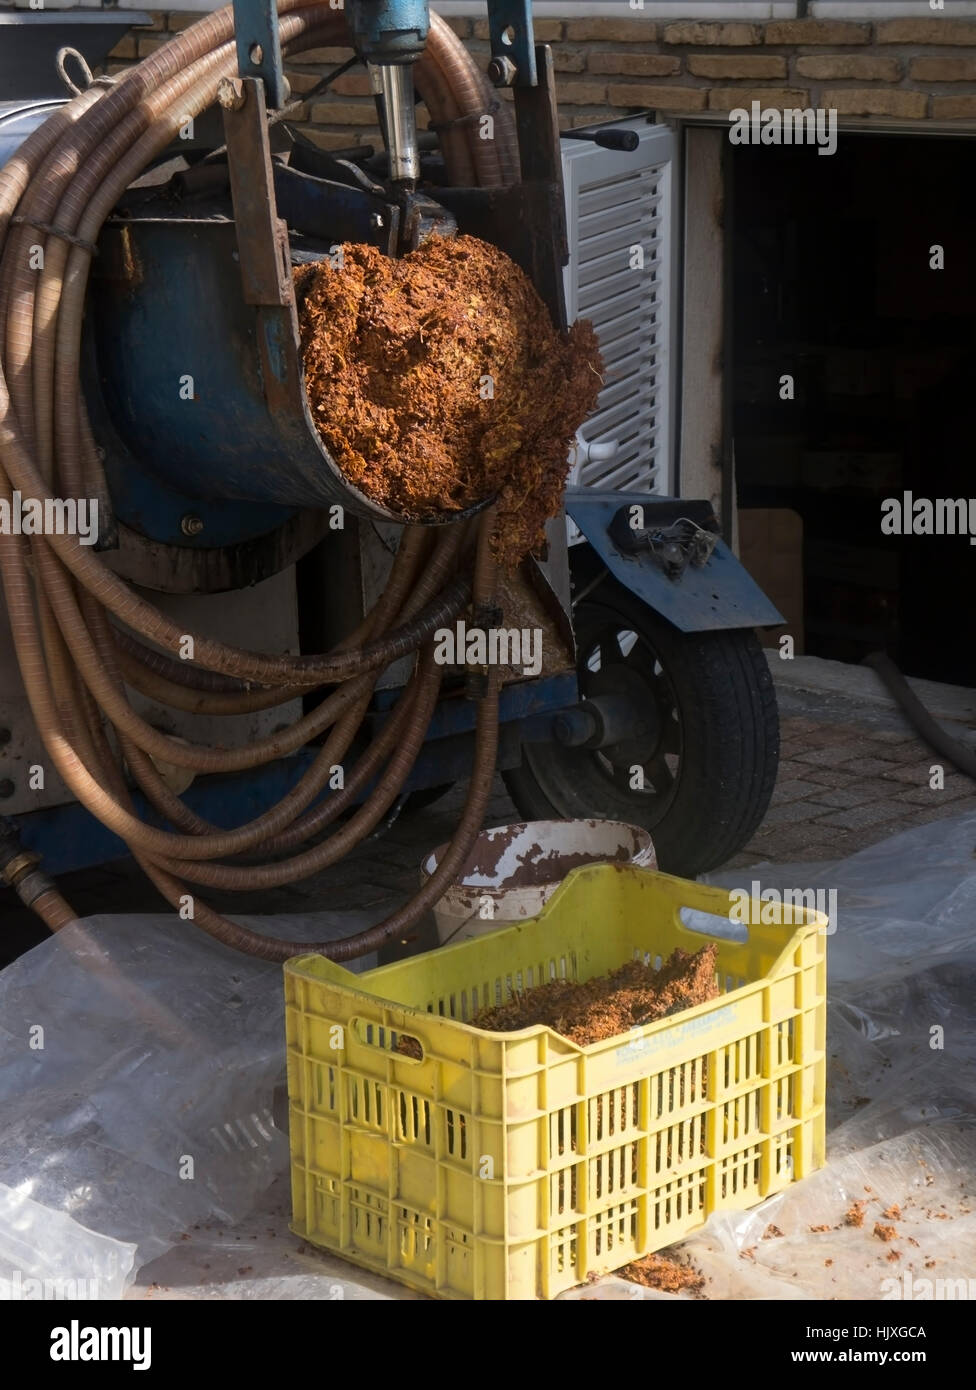 Grapes that have harvested and are being crushed ready for bottling. Stock Photo